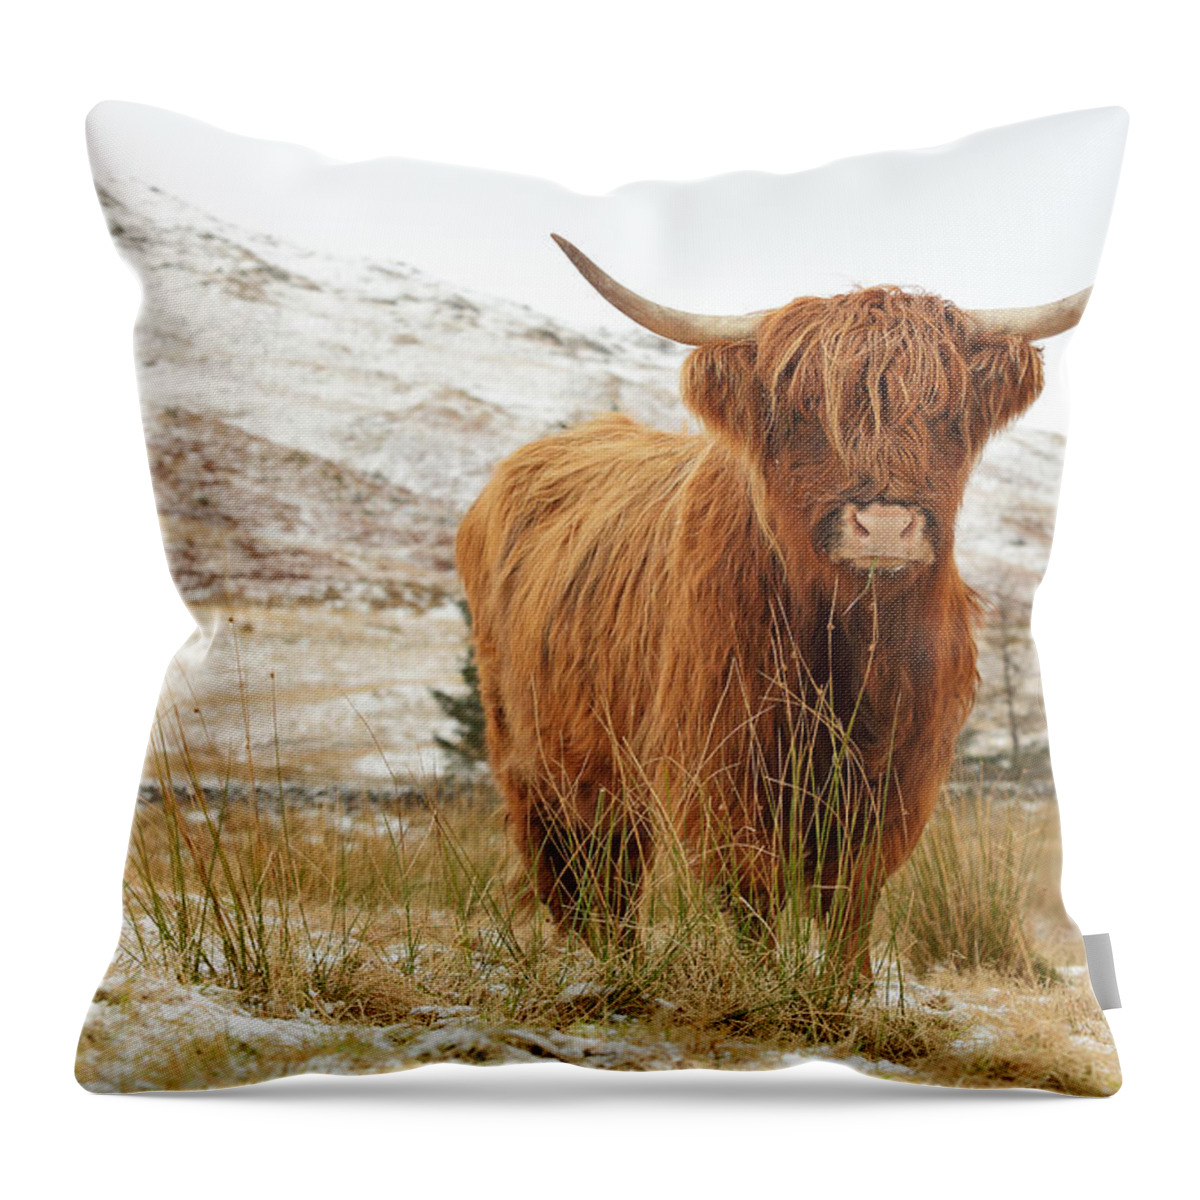 Highland Cattle Throw Pillow featuring the photograph Highland Cow by Grant Glendinning